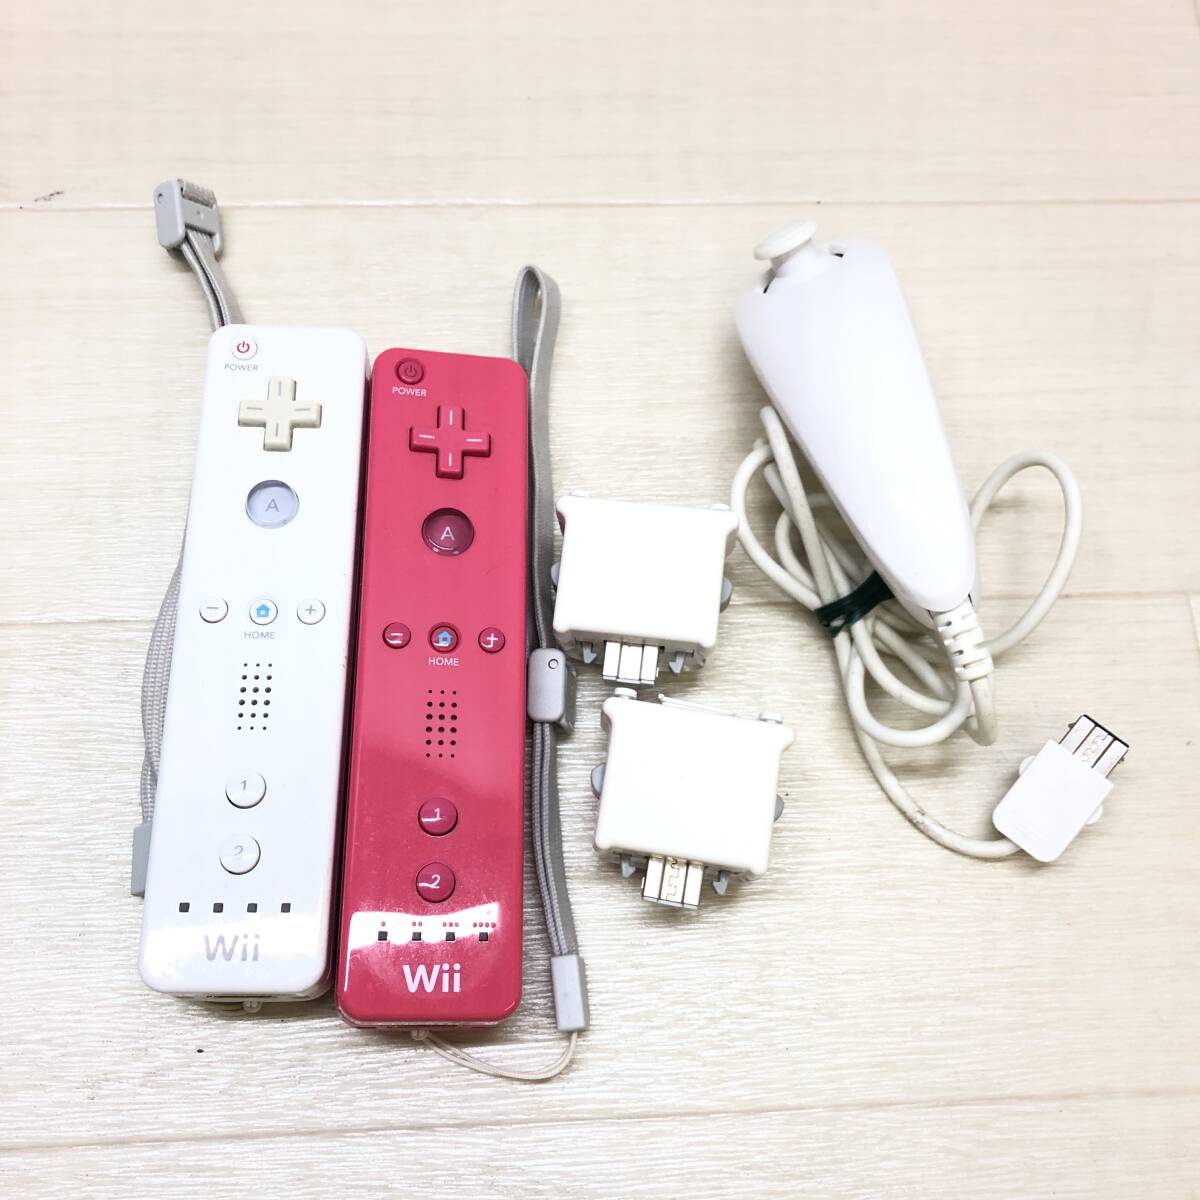 ^ Nintendo nintendo Wii RVL-001 body remote control nn tea k soft set the first period . settled game operation verification settled secondhand goods ^G72817